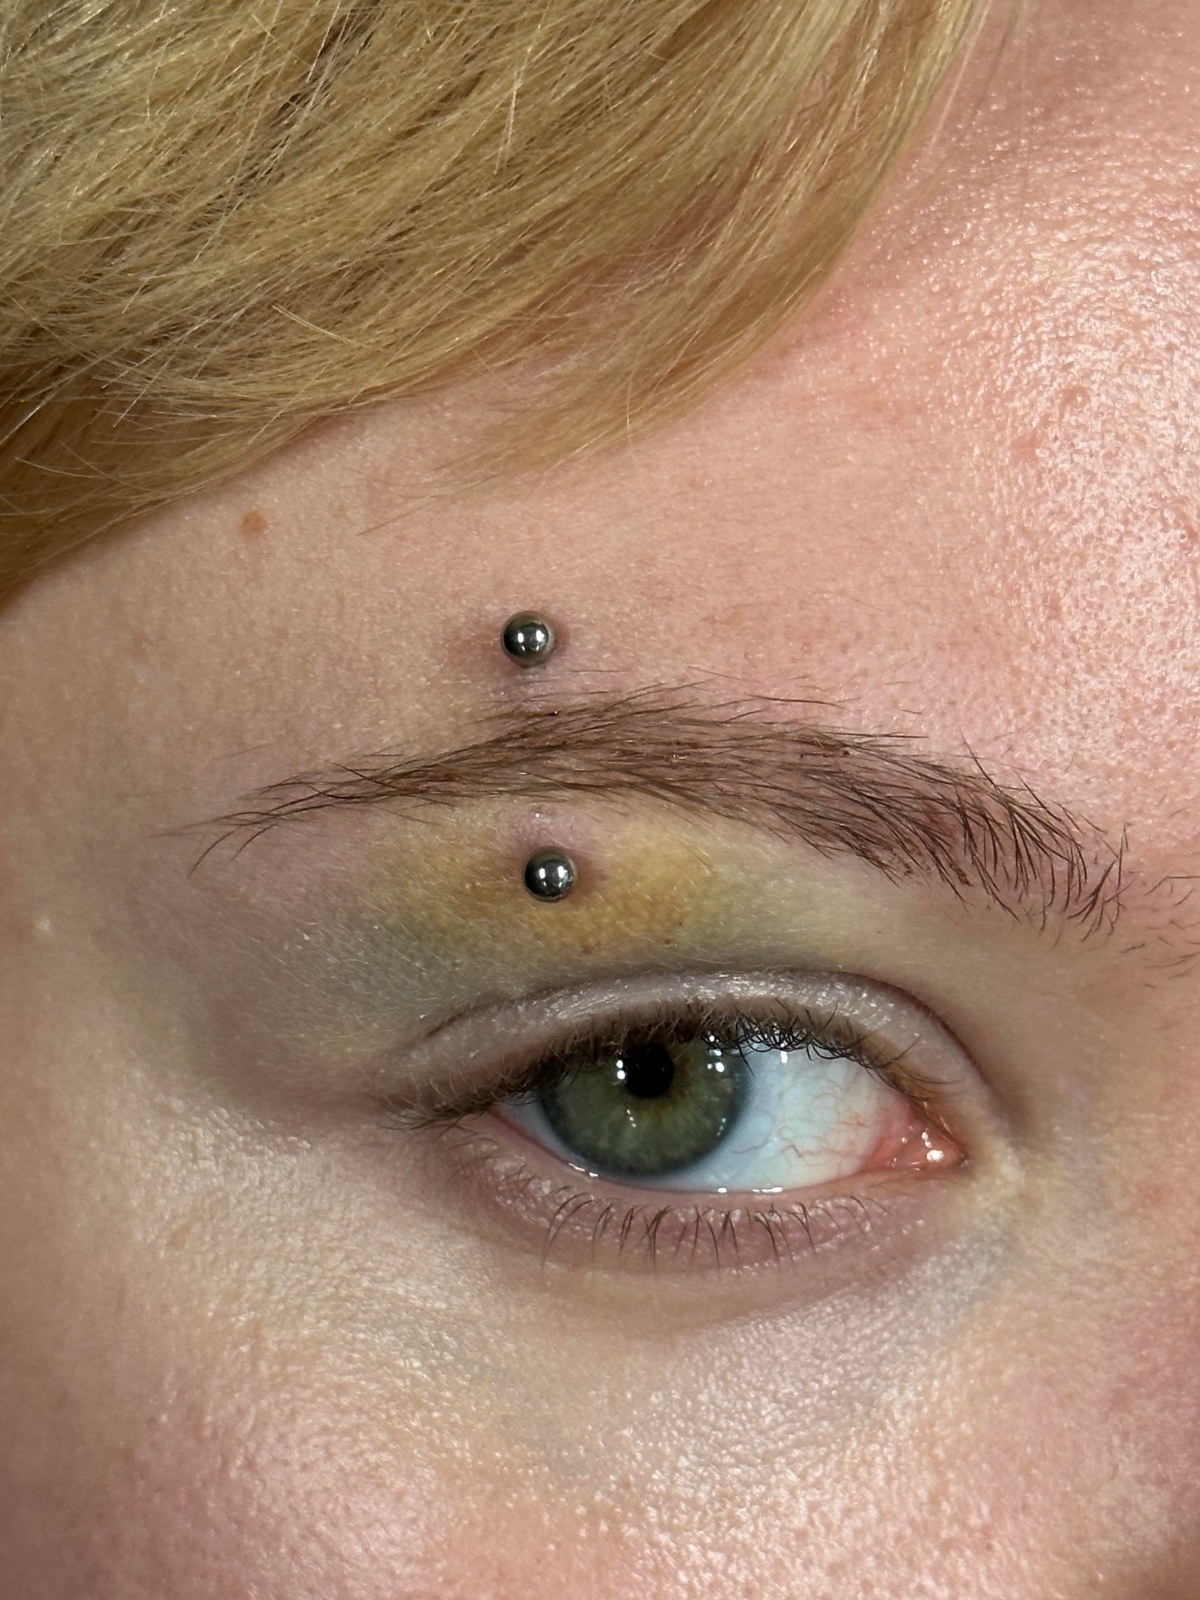 Everything You Need to Know About the Eyebrow Piercing